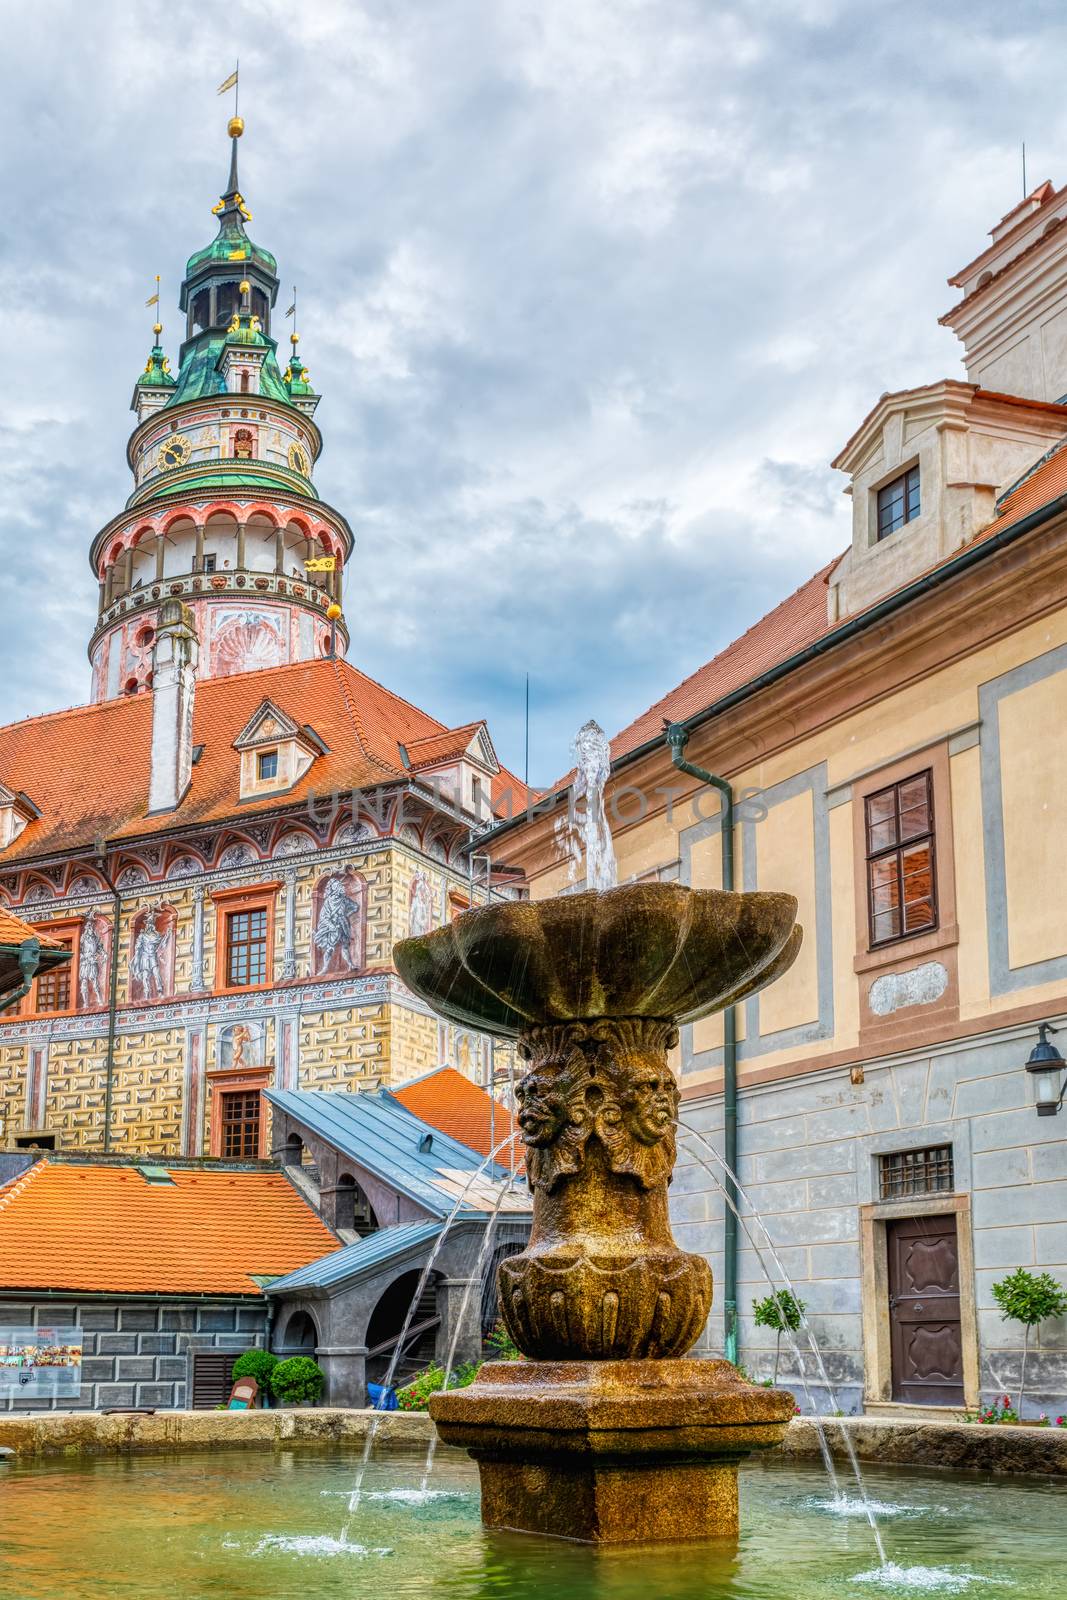 Romantic View of the Castle Tower and Fountain in the Courtyard in Cesky Krumlov